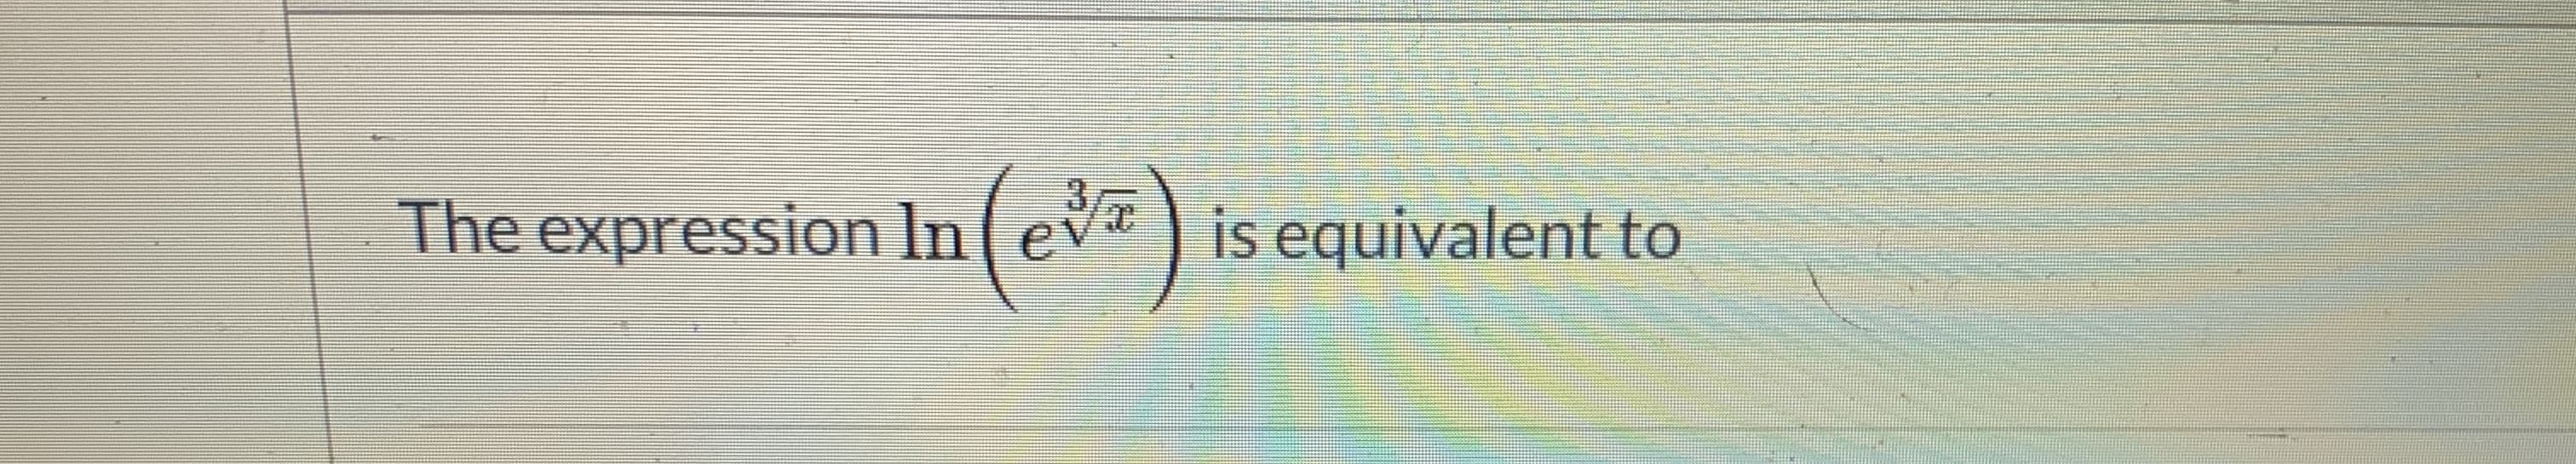 The expression In(ev is equivalent to
(c*7)
3,
